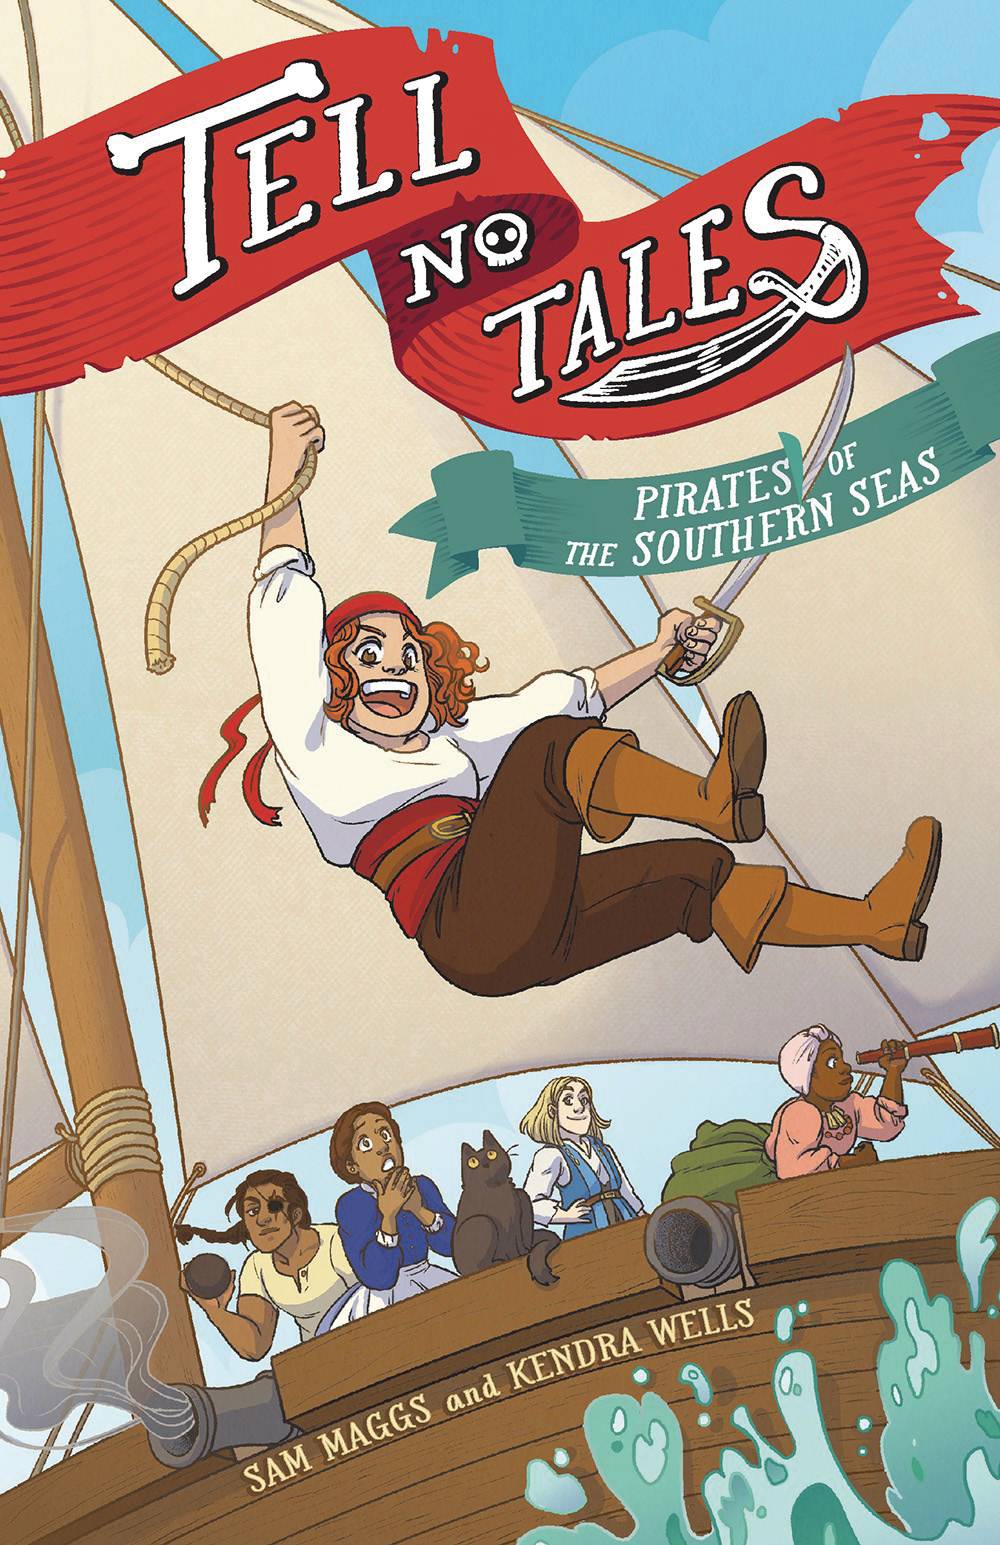 TELL NO TALES PIRATES OF SOUTHERN SEA TP